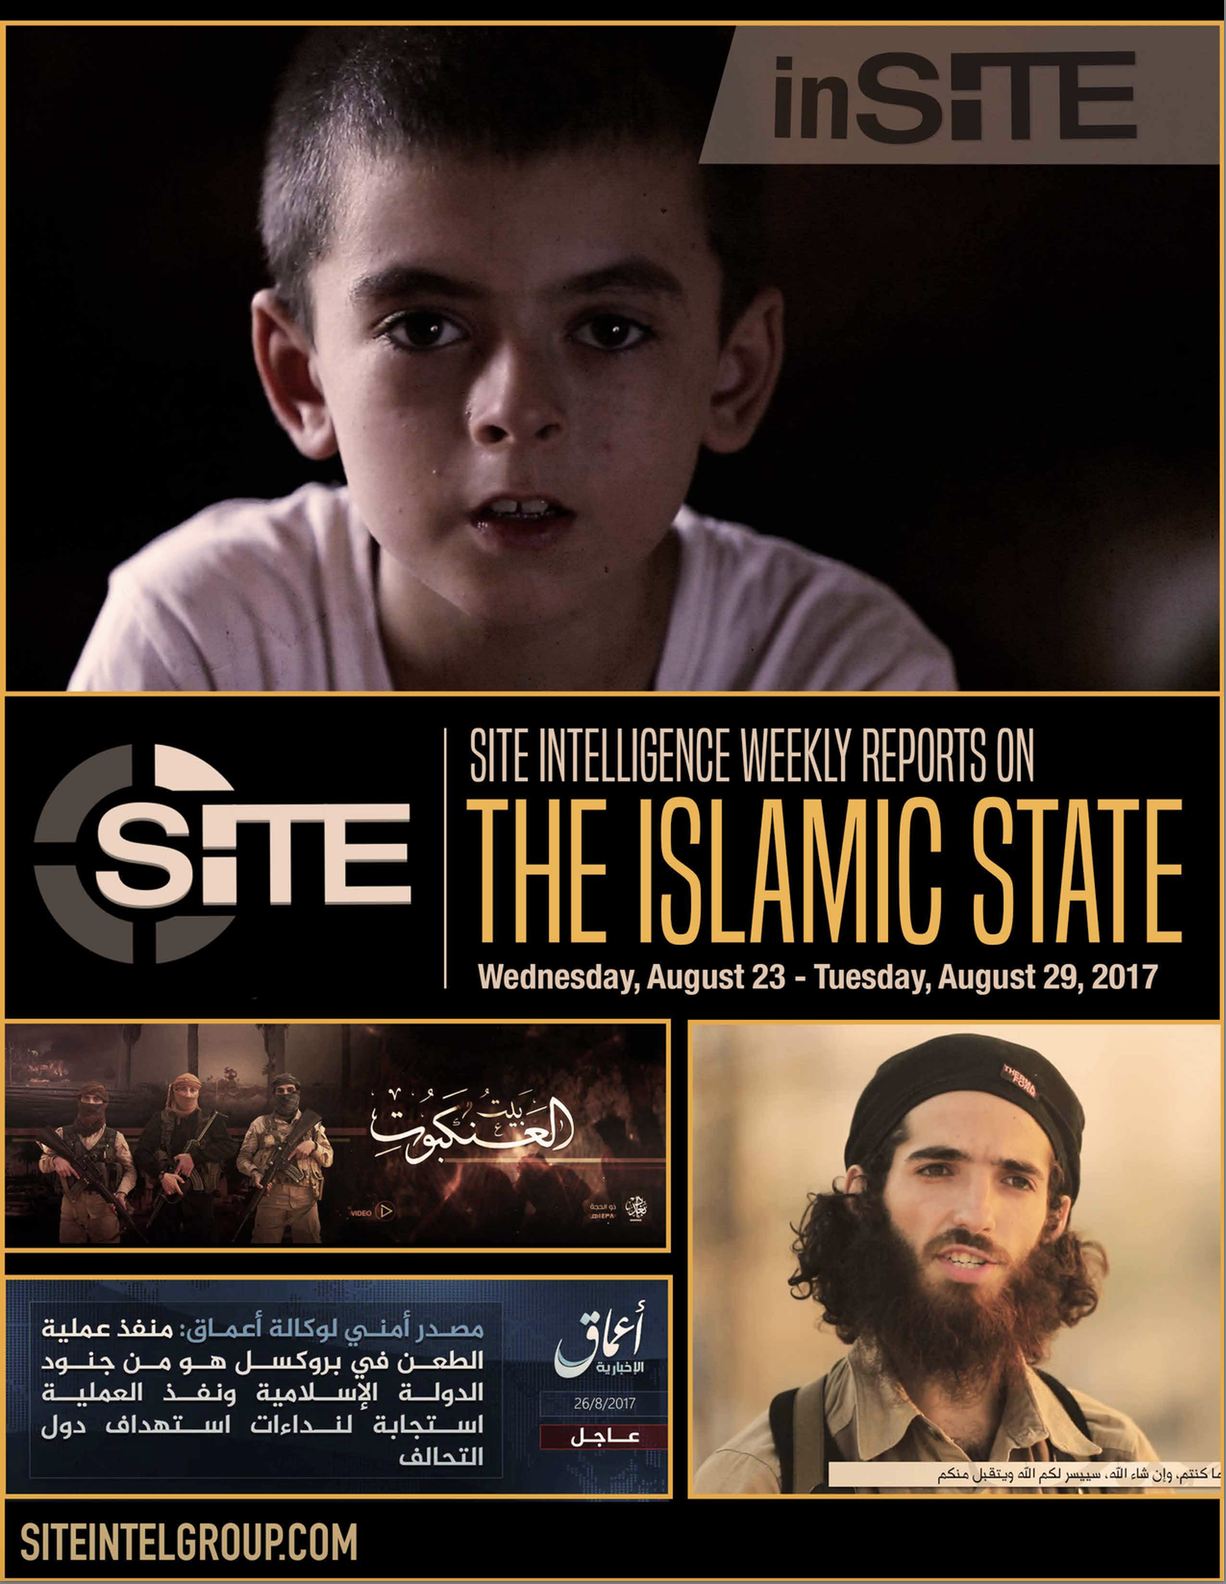 Weekly inSITE on the Islamic State, August 23-29 2017